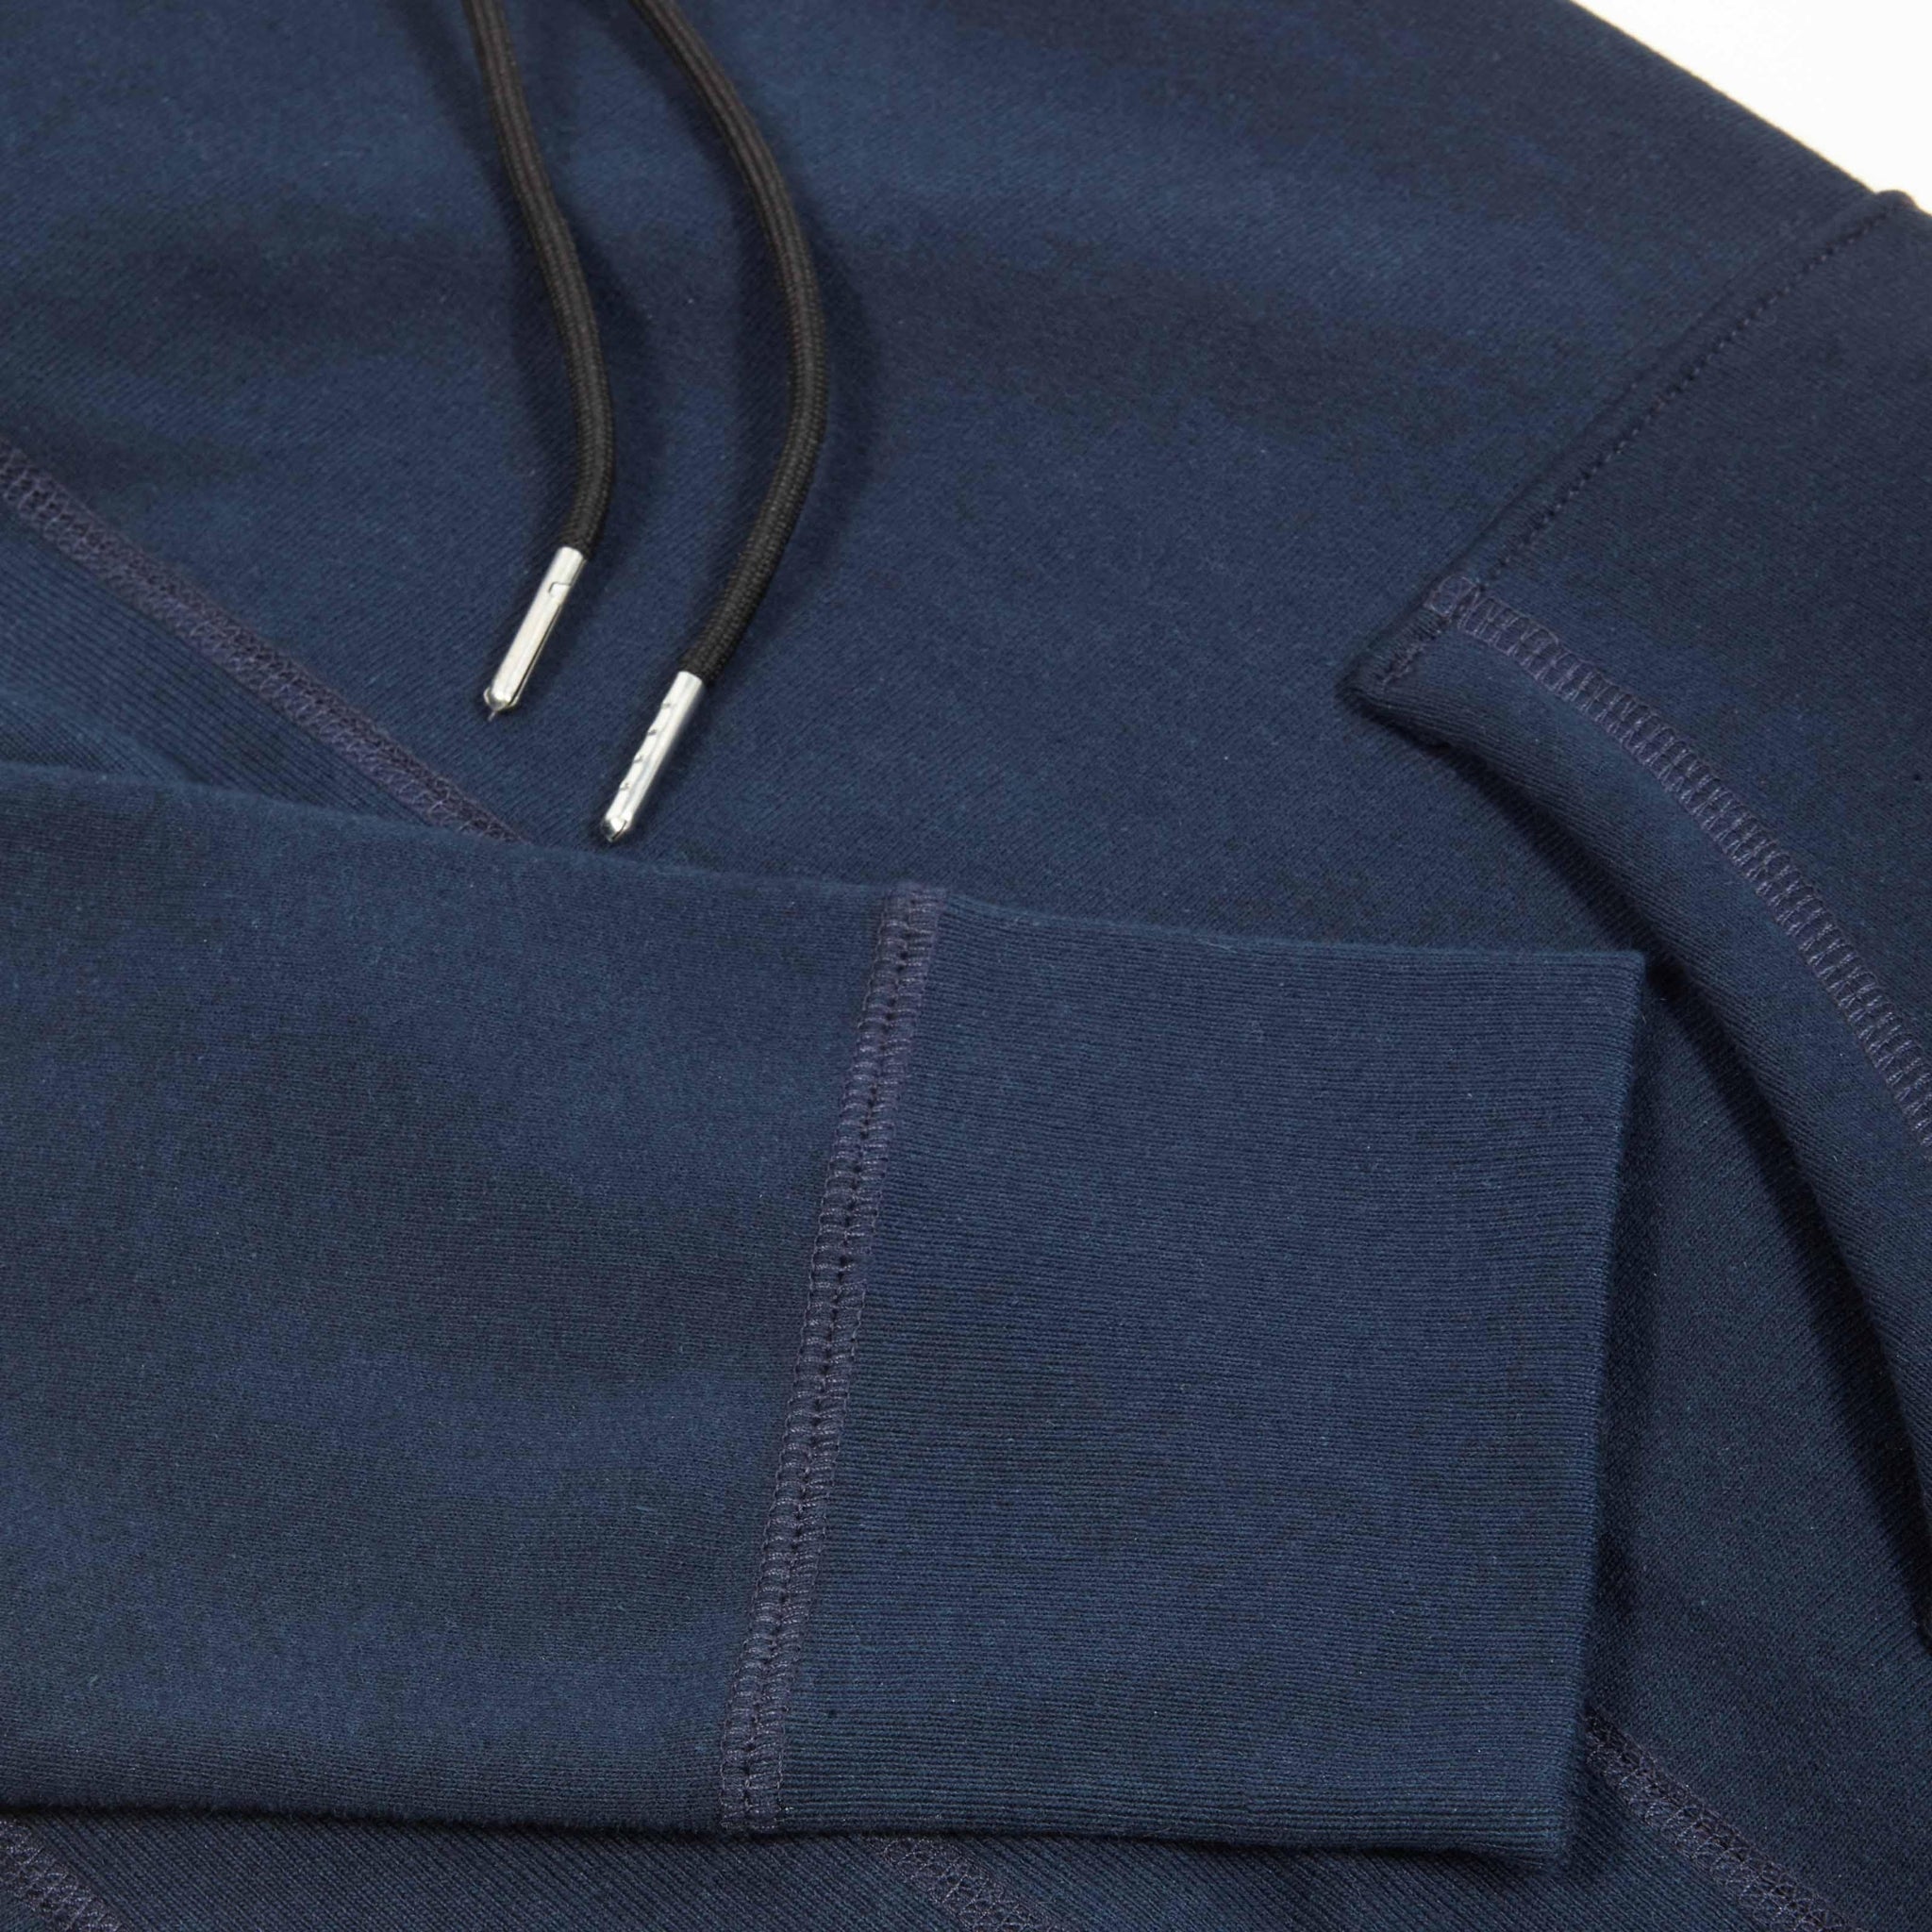 detailed hardware and sleeve view of a Bedi' "second life" program navy hoodie against a white background